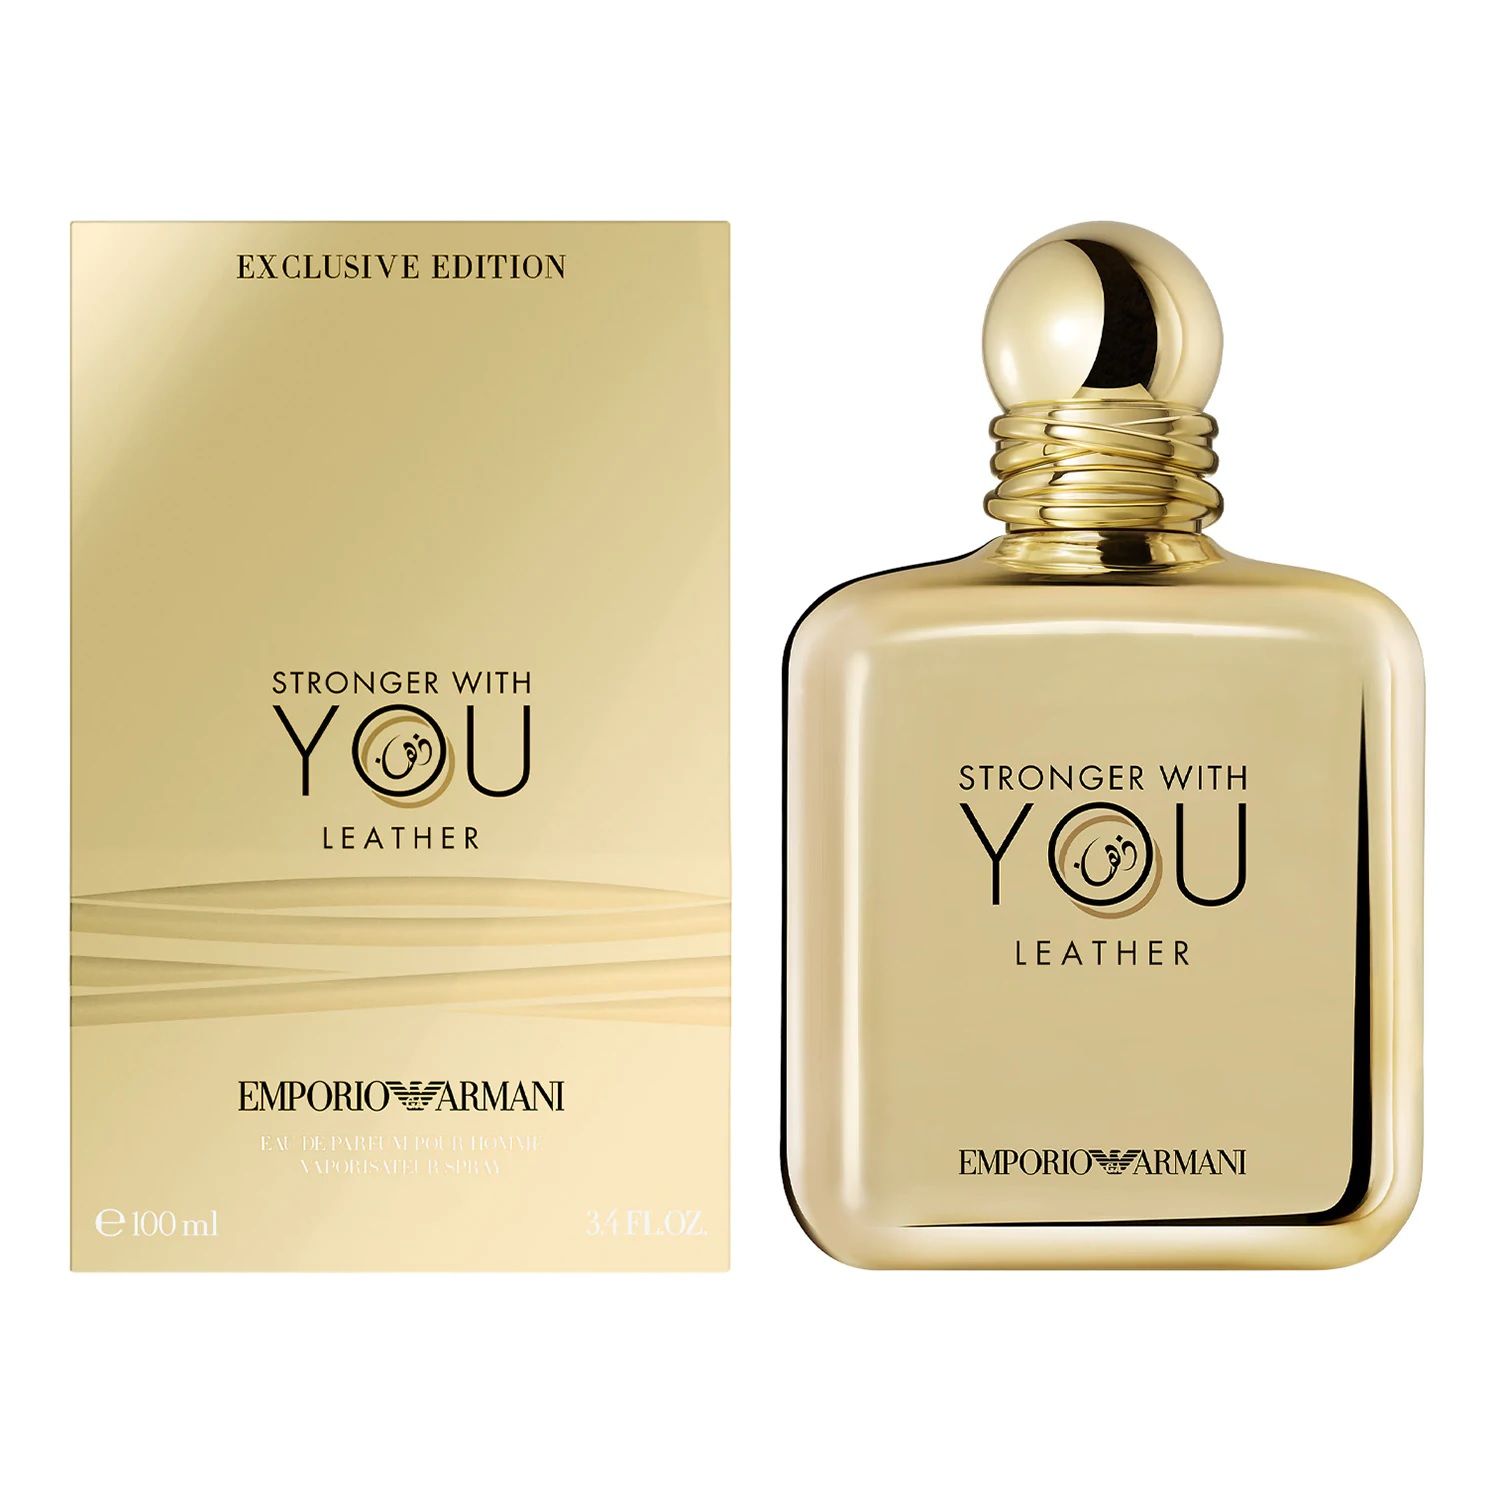 Emporio Armani Stronger With You Leather Giorgio Armani ماء كولونيا - a